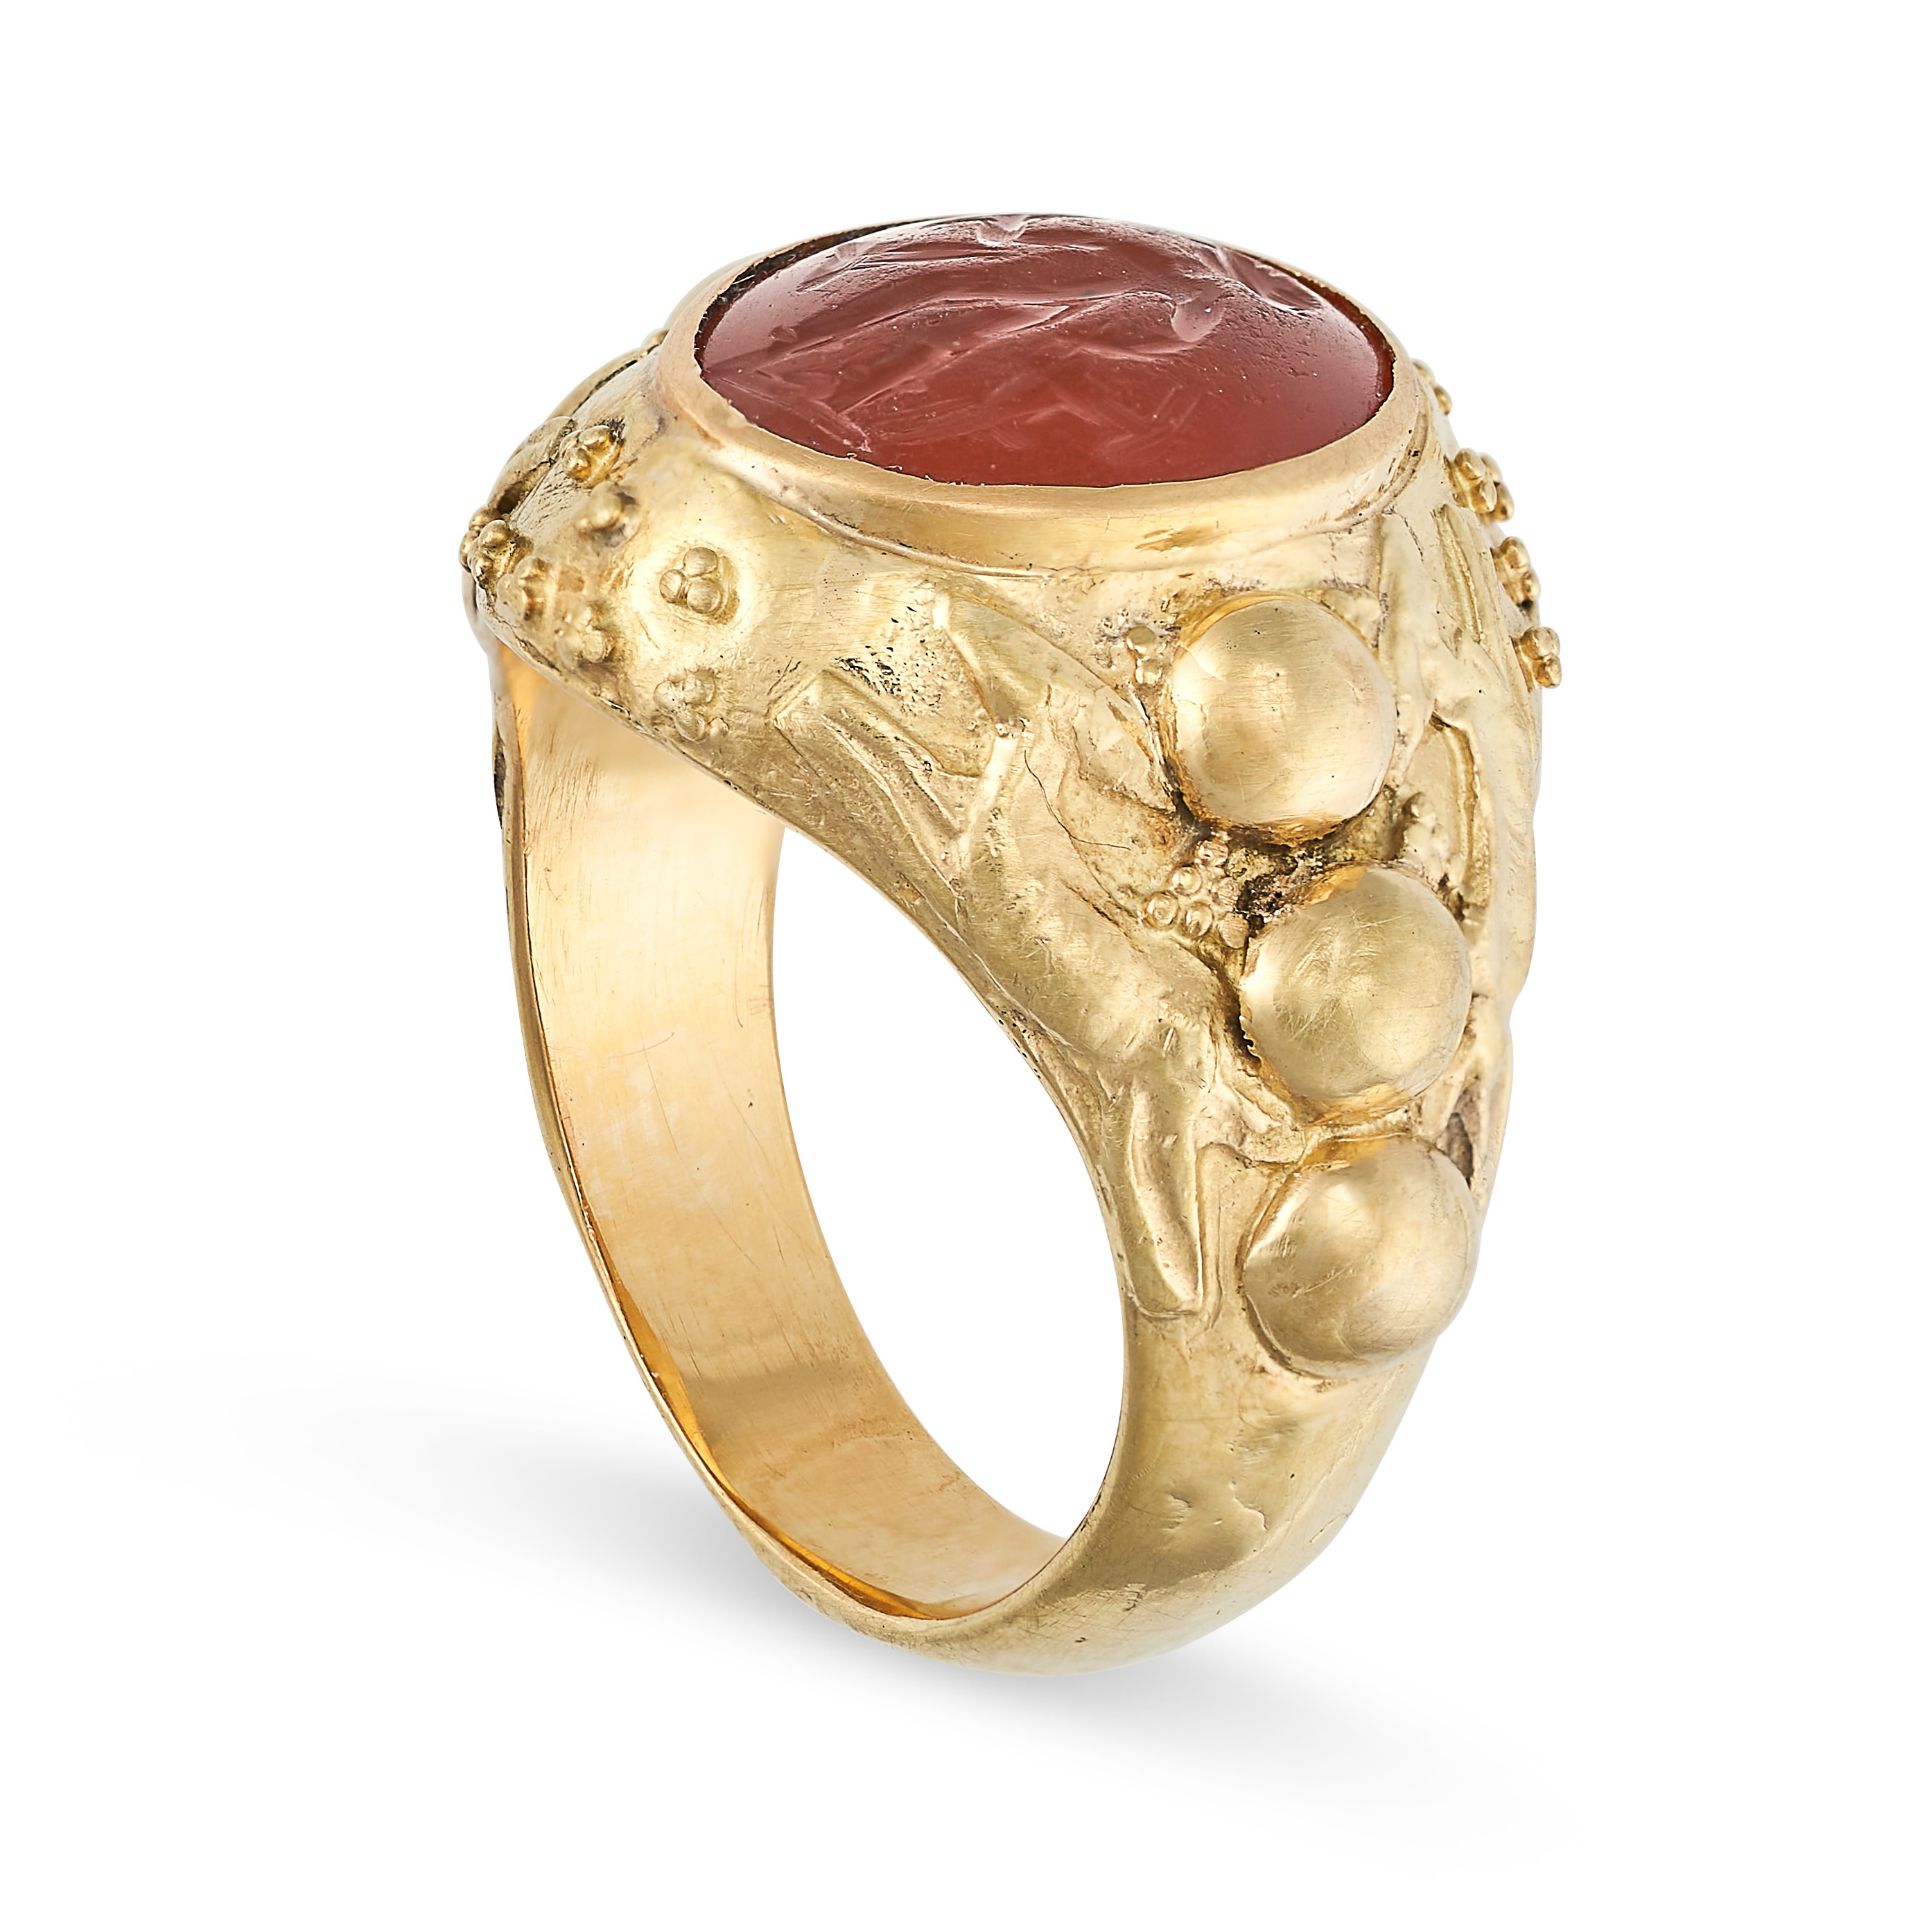 AN ANTIQUE CARNELIAN INTAGLIO RING in 18ct yellow gold, set with an oval carnelian intaglio carve...